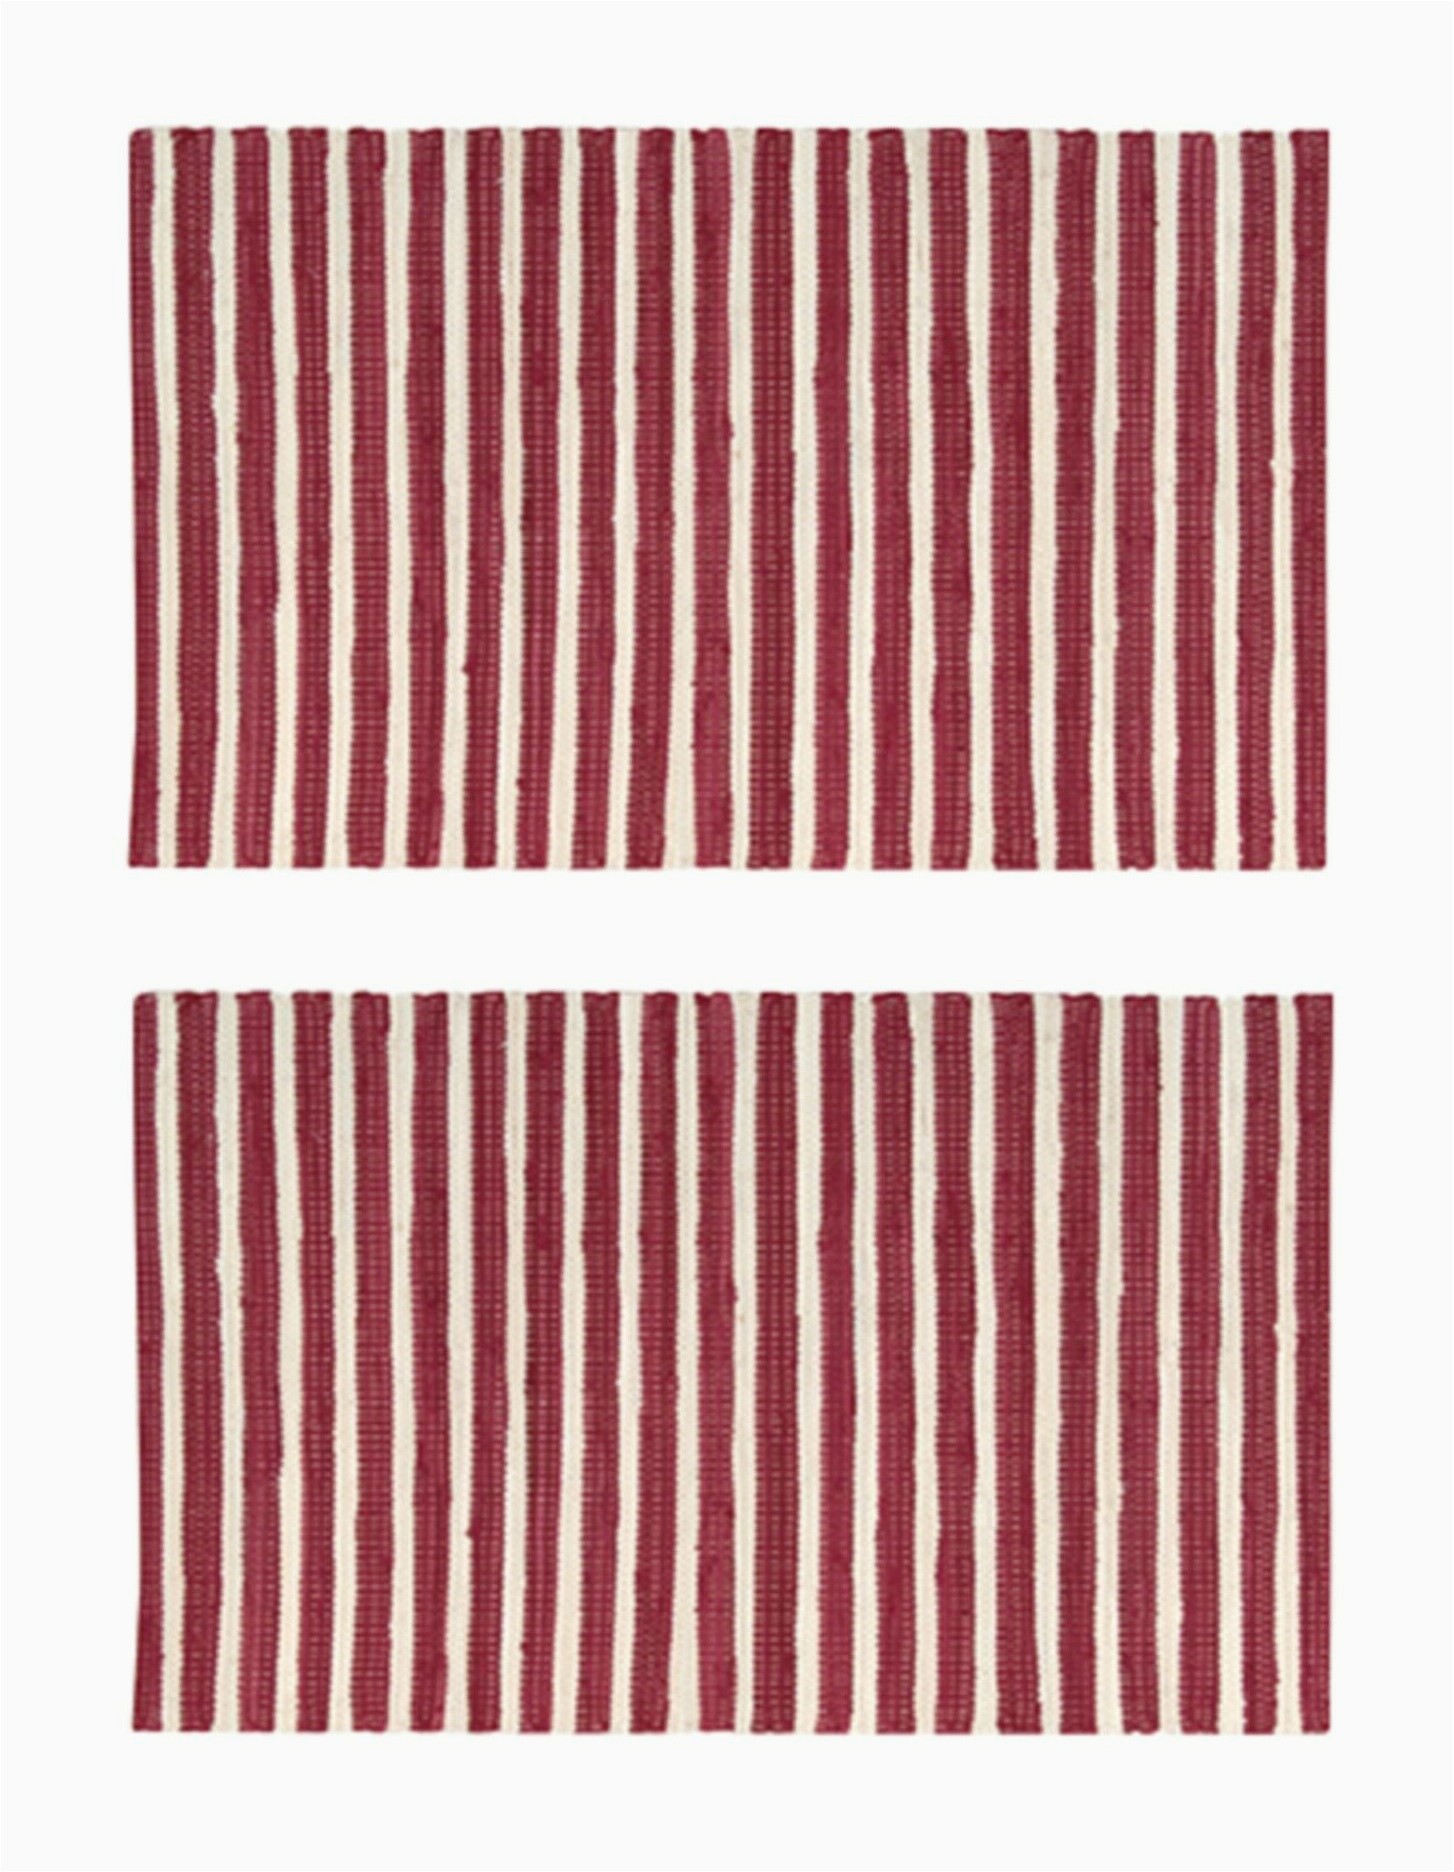 36 X 48 area Rug Details About 2 Pack Nourison Brunswick Stripe Accent Floor area Rugs 24" X 36" or 30" X 48"